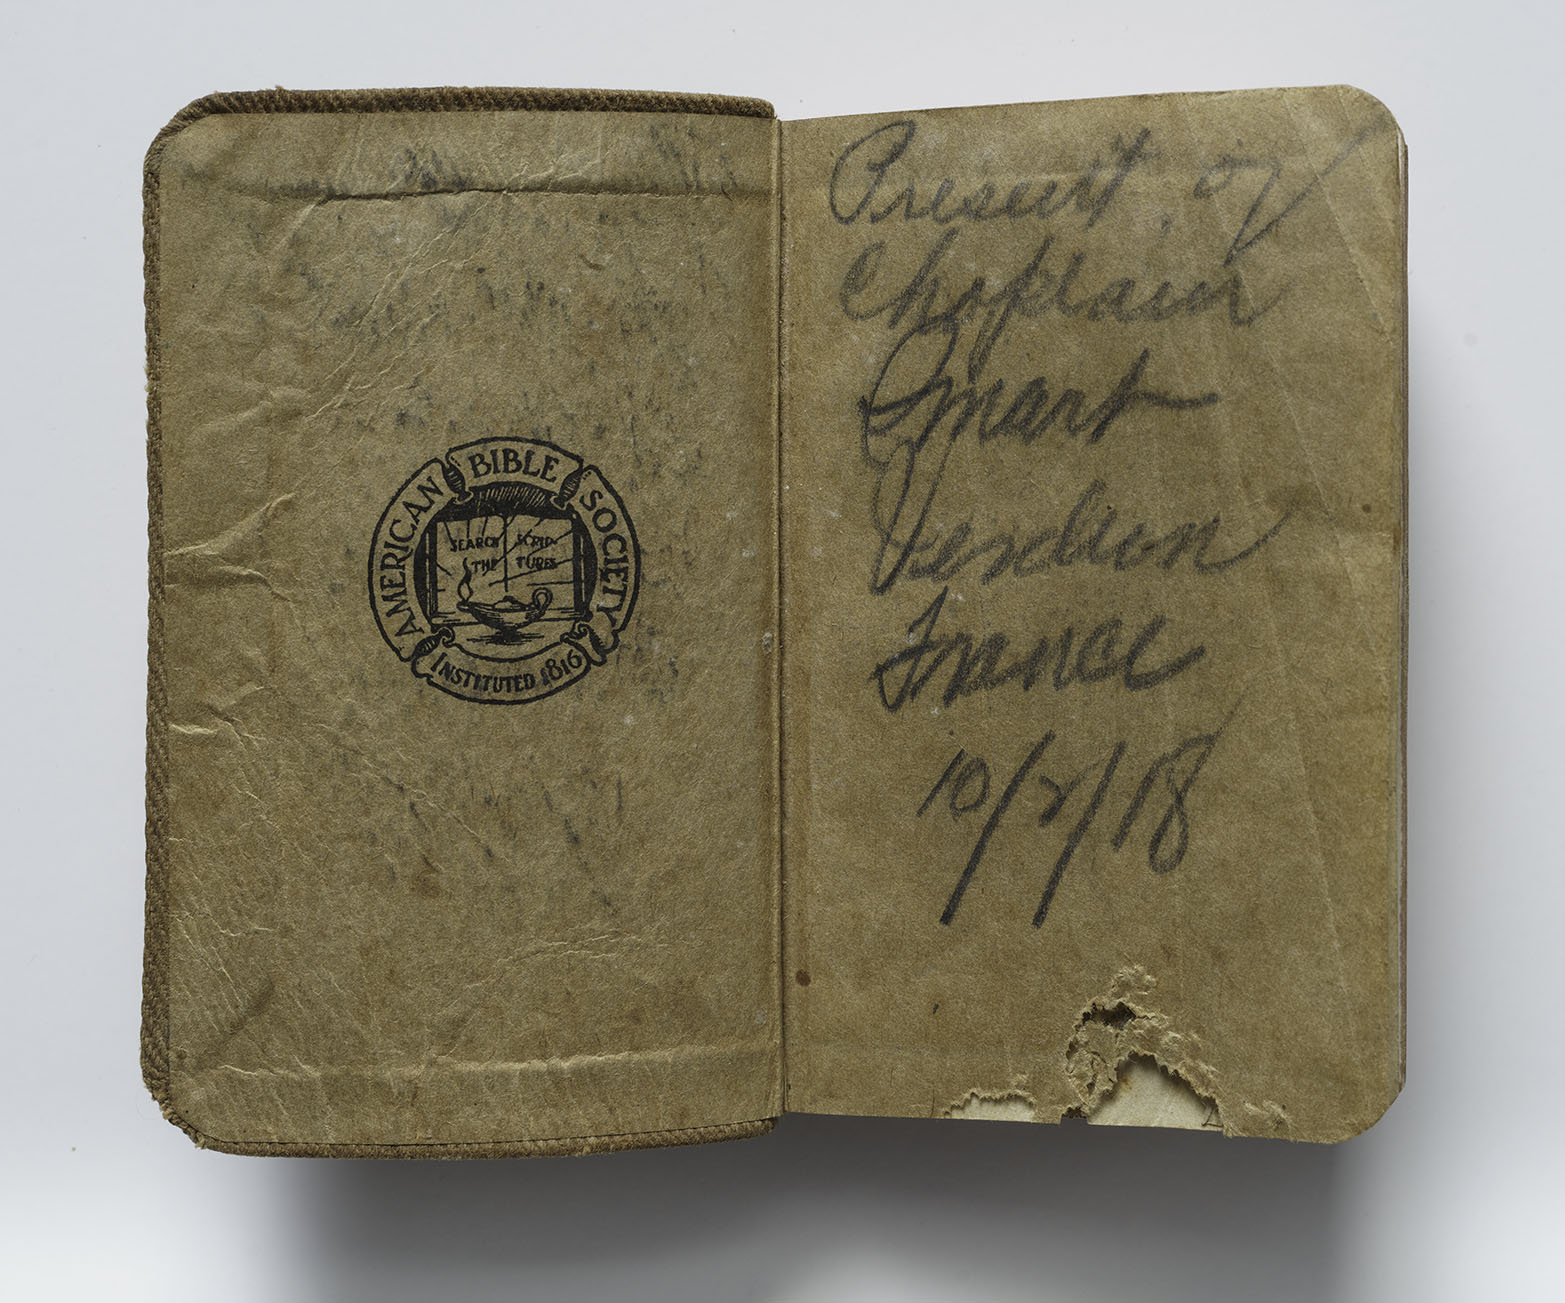 Modern photograph of an aged and torn book opened to the first page. The inside of the front cover is stamped with a crest for 'American Bible Society / Instituted 1816' depicting an ancient oil lamp in front of a book upon which is written, 'Read The Scripture.' On the front page is written in loose cursive 'Present of Chaplain Smart, Verdun, France, 10/8/18'